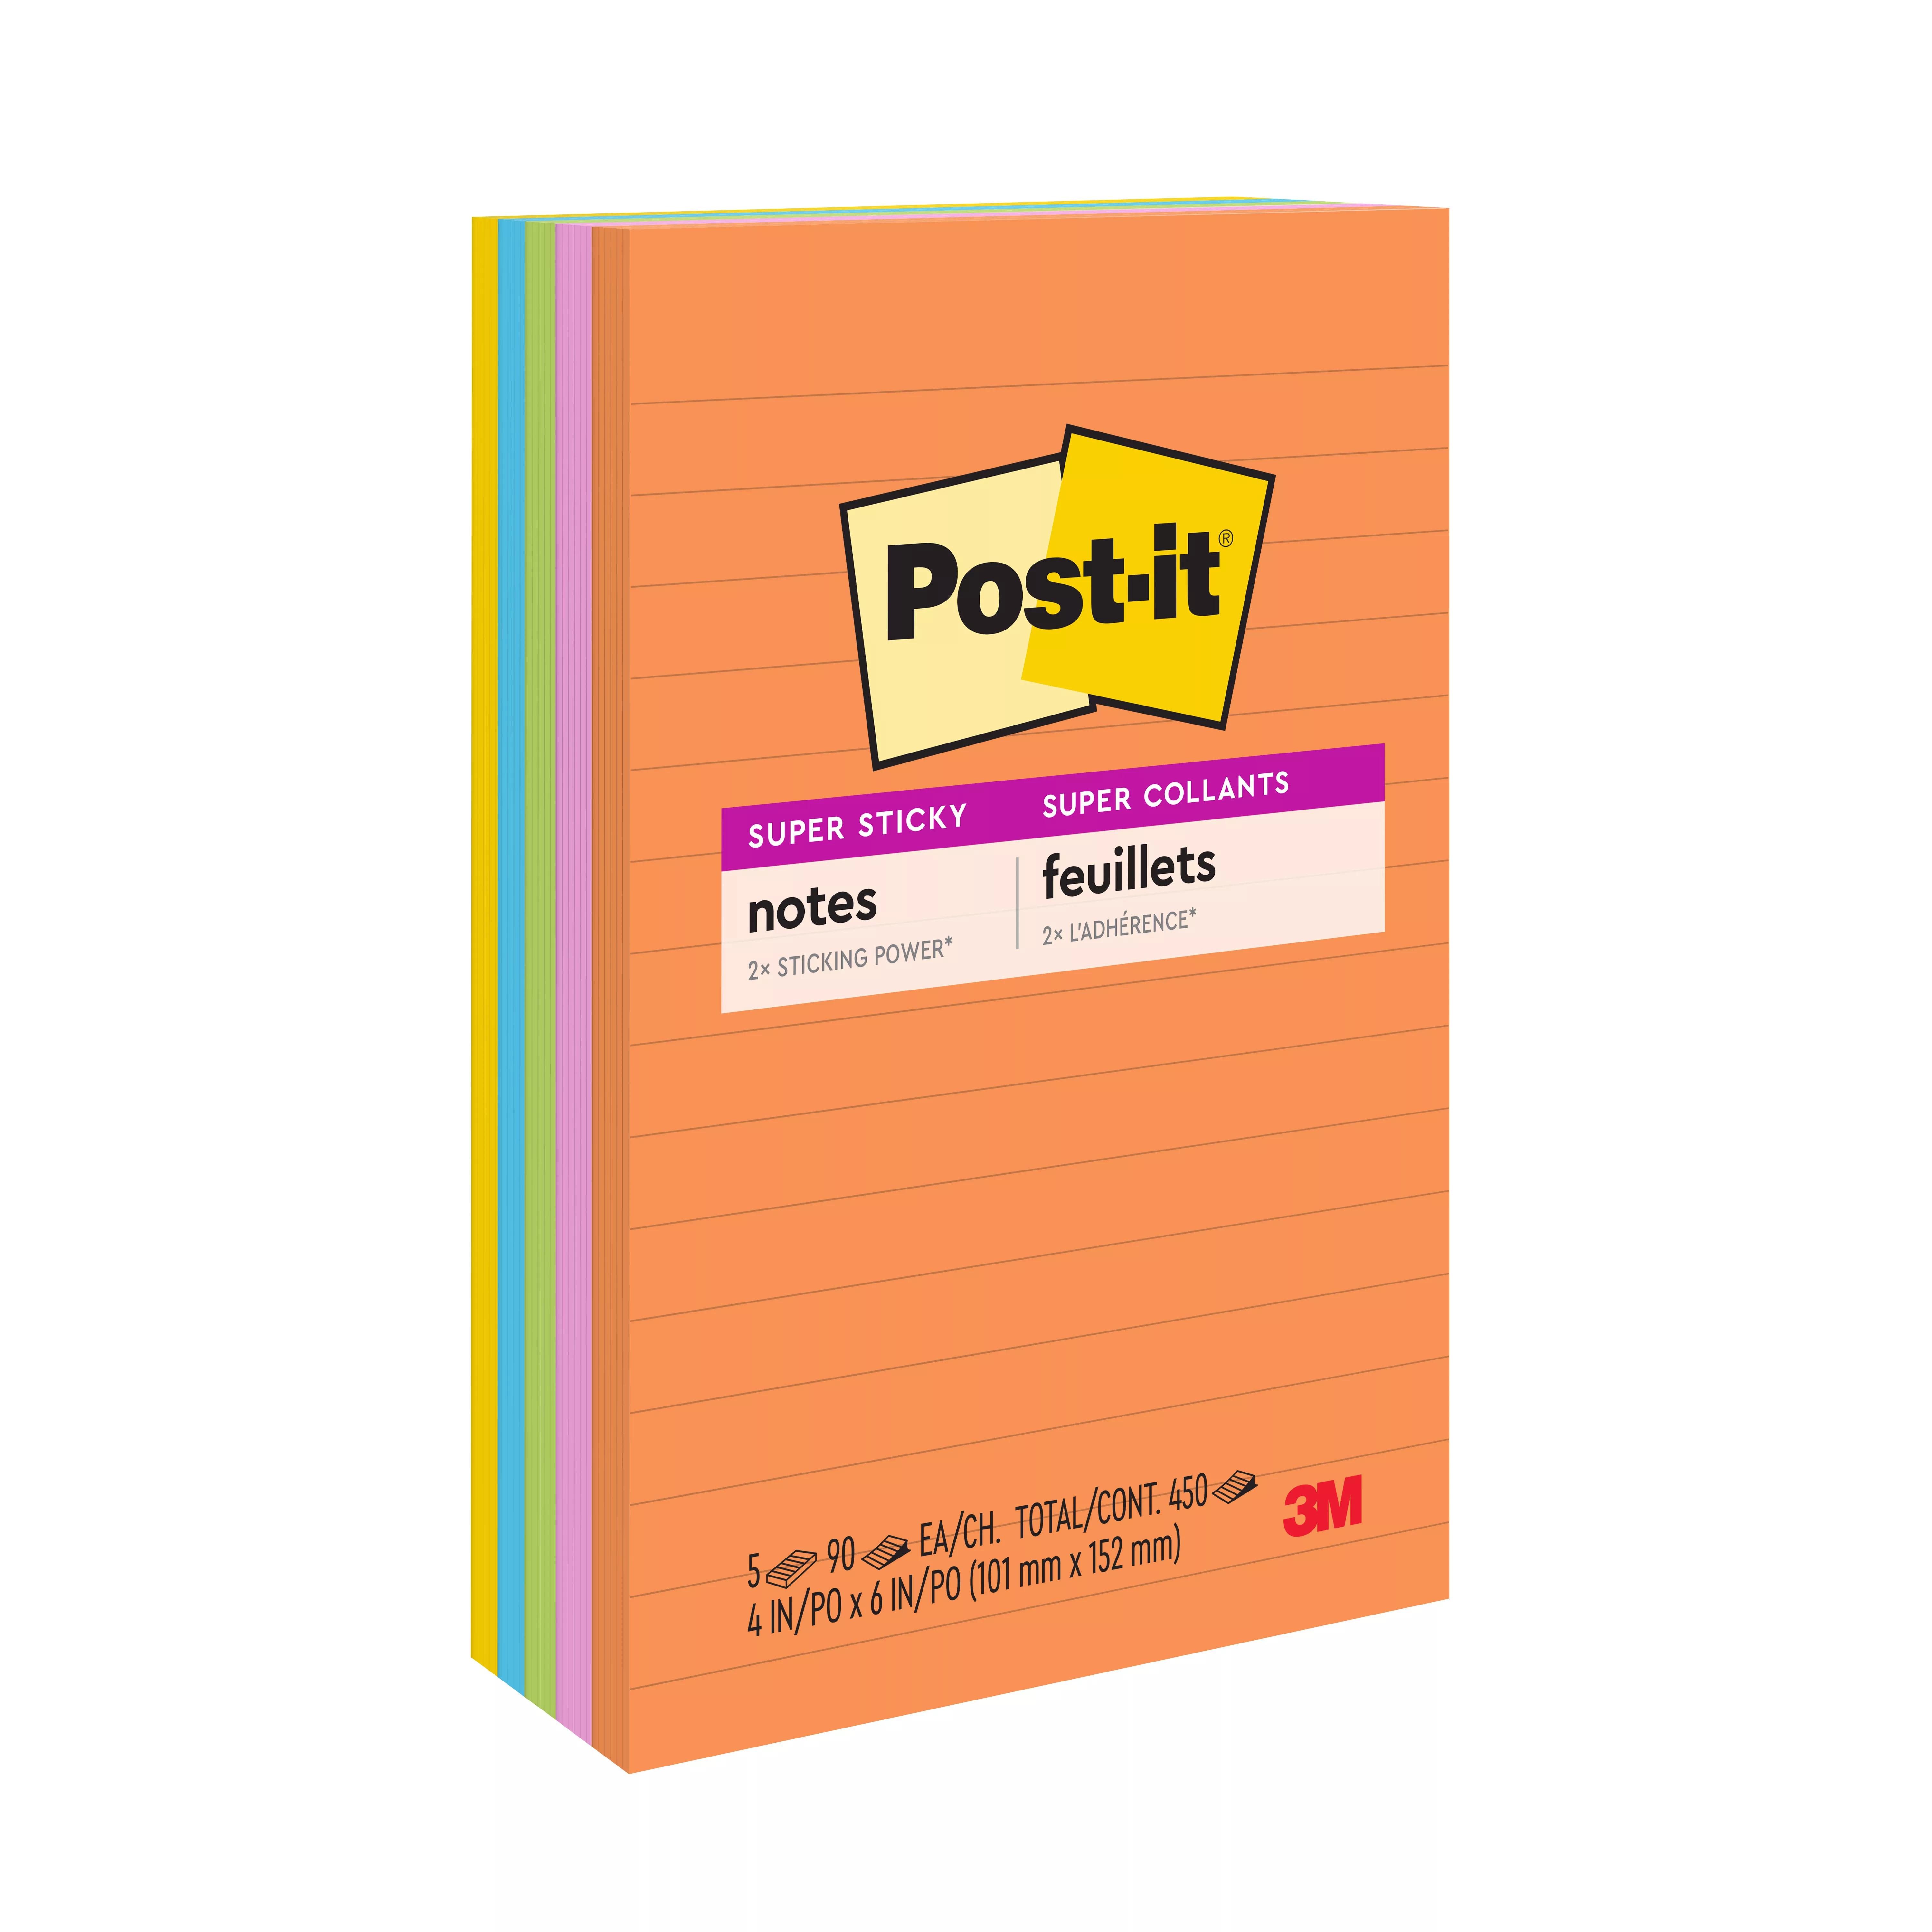 Post-it® Super Sticky Notes 660-5SSUC, 4 in x 6 in (101 mm x 152 mm)